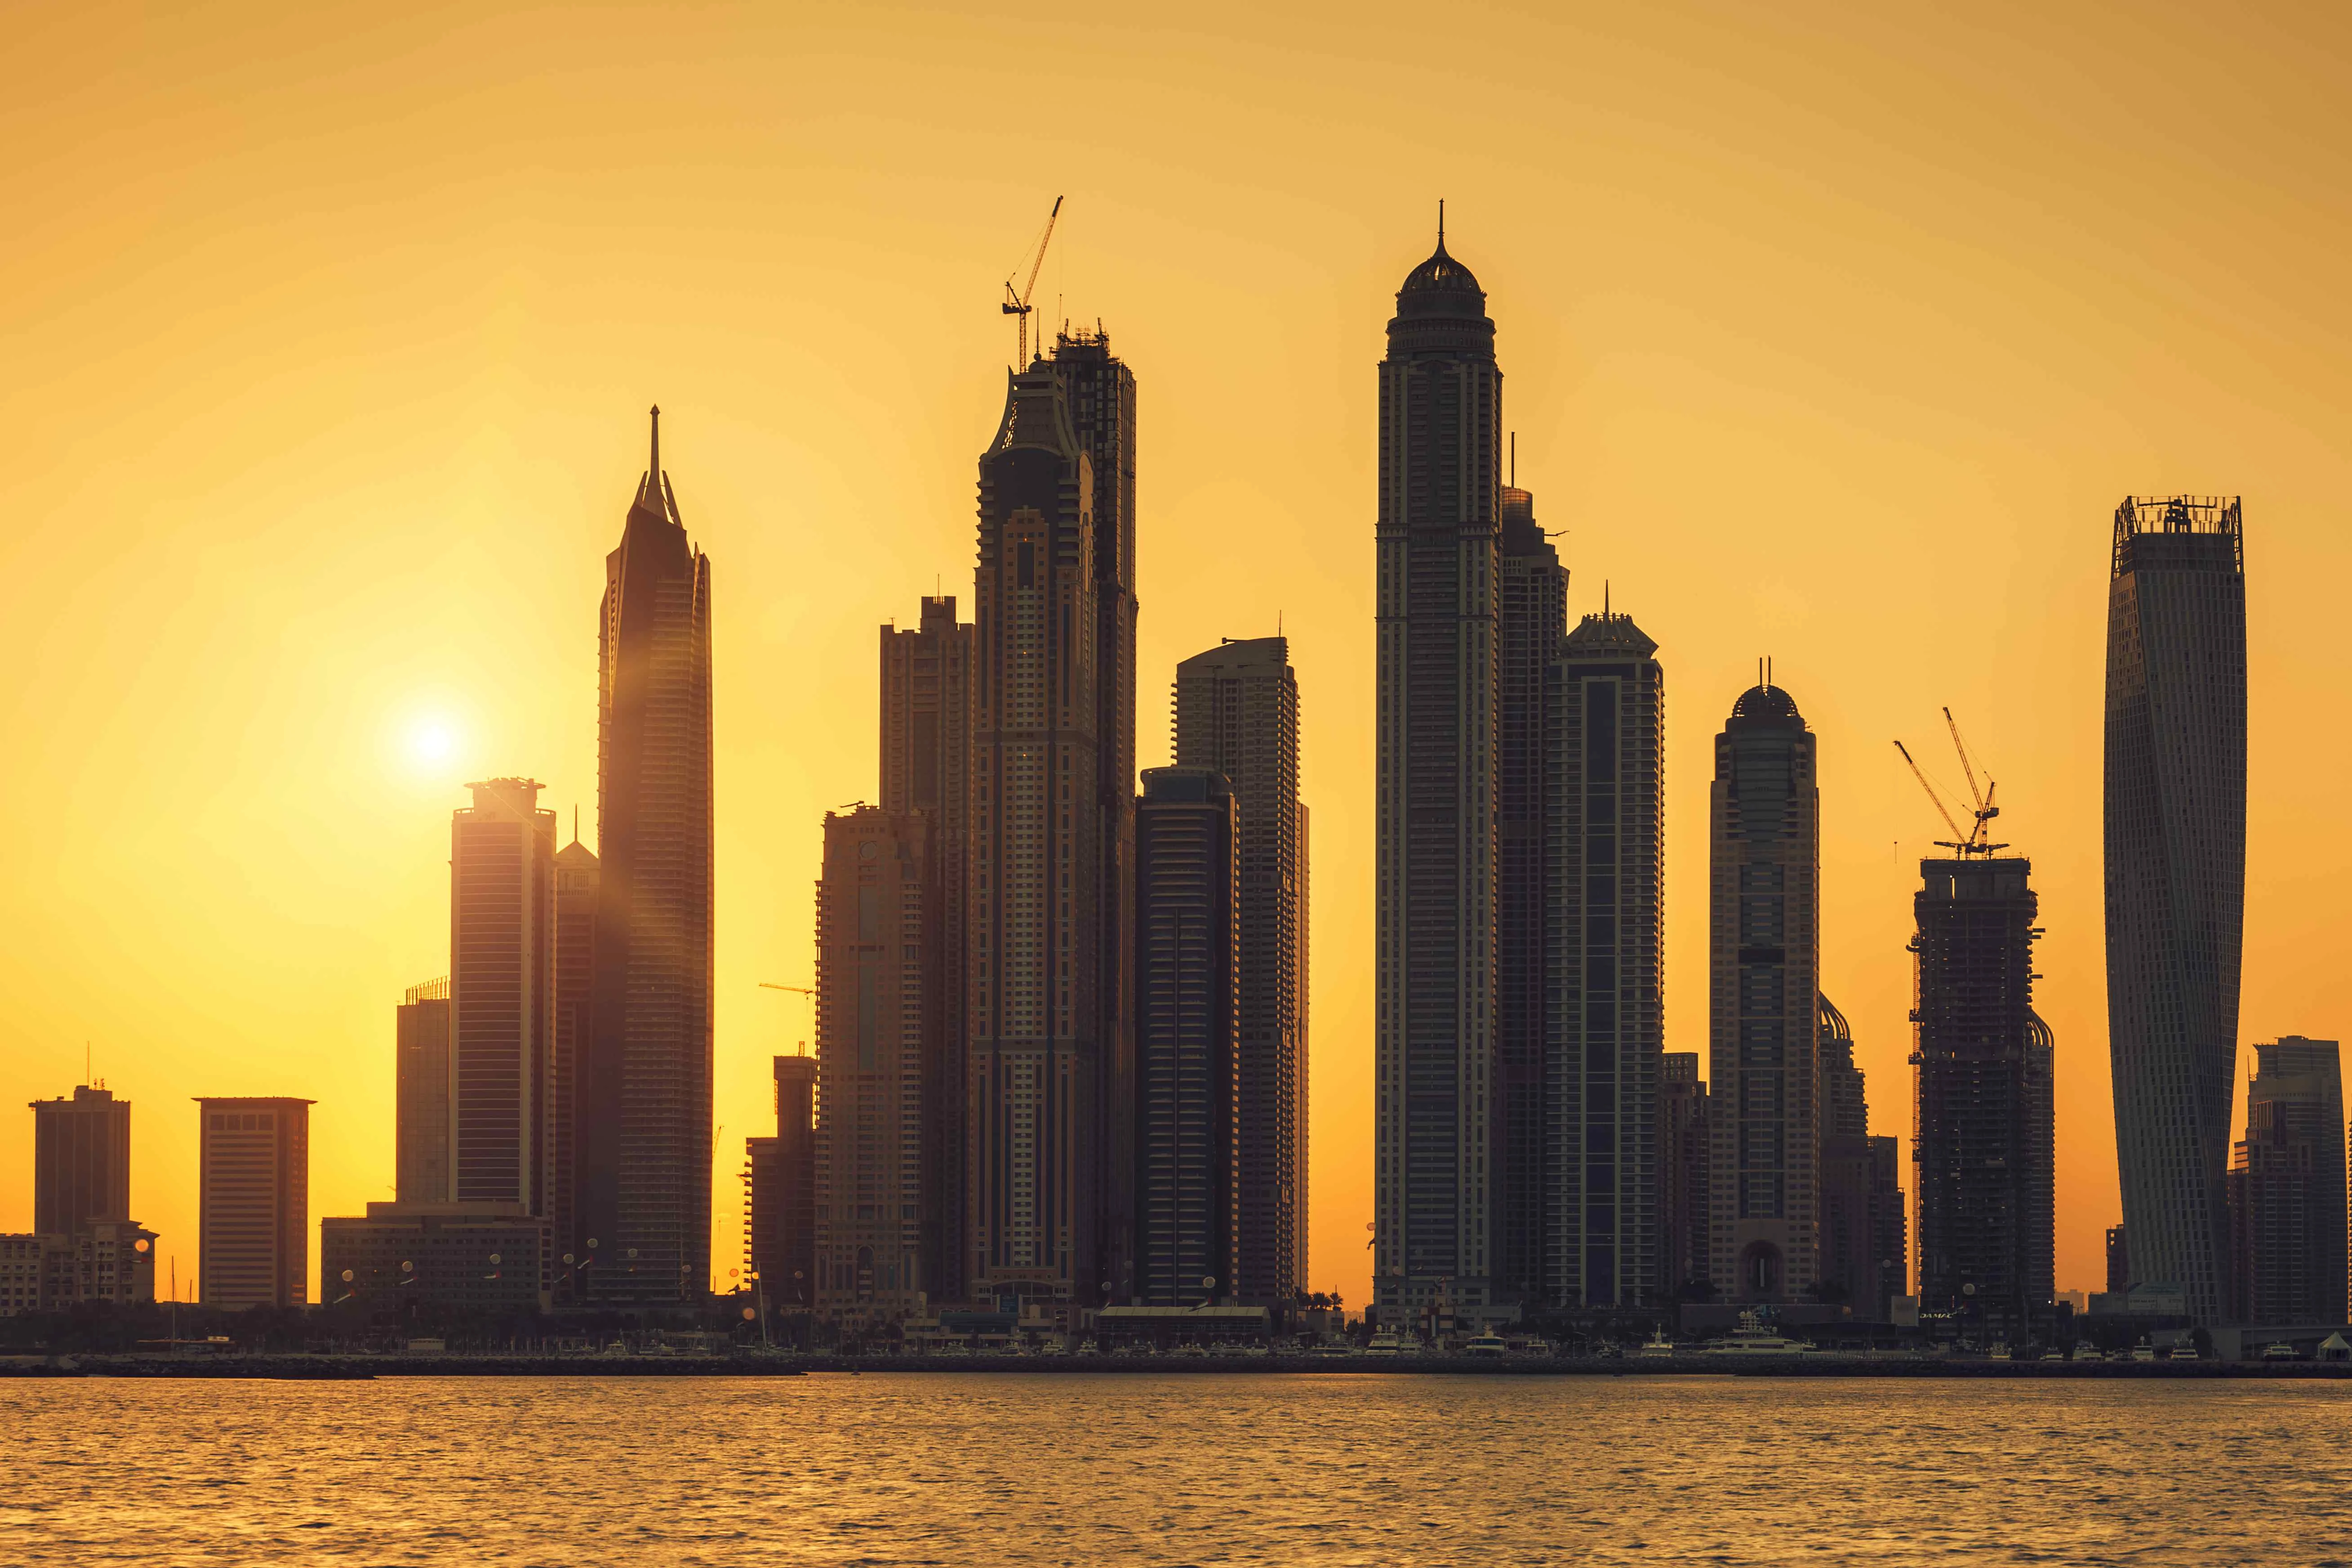  nvesting in Dubai Real Estate: Is it Worth the Risk?